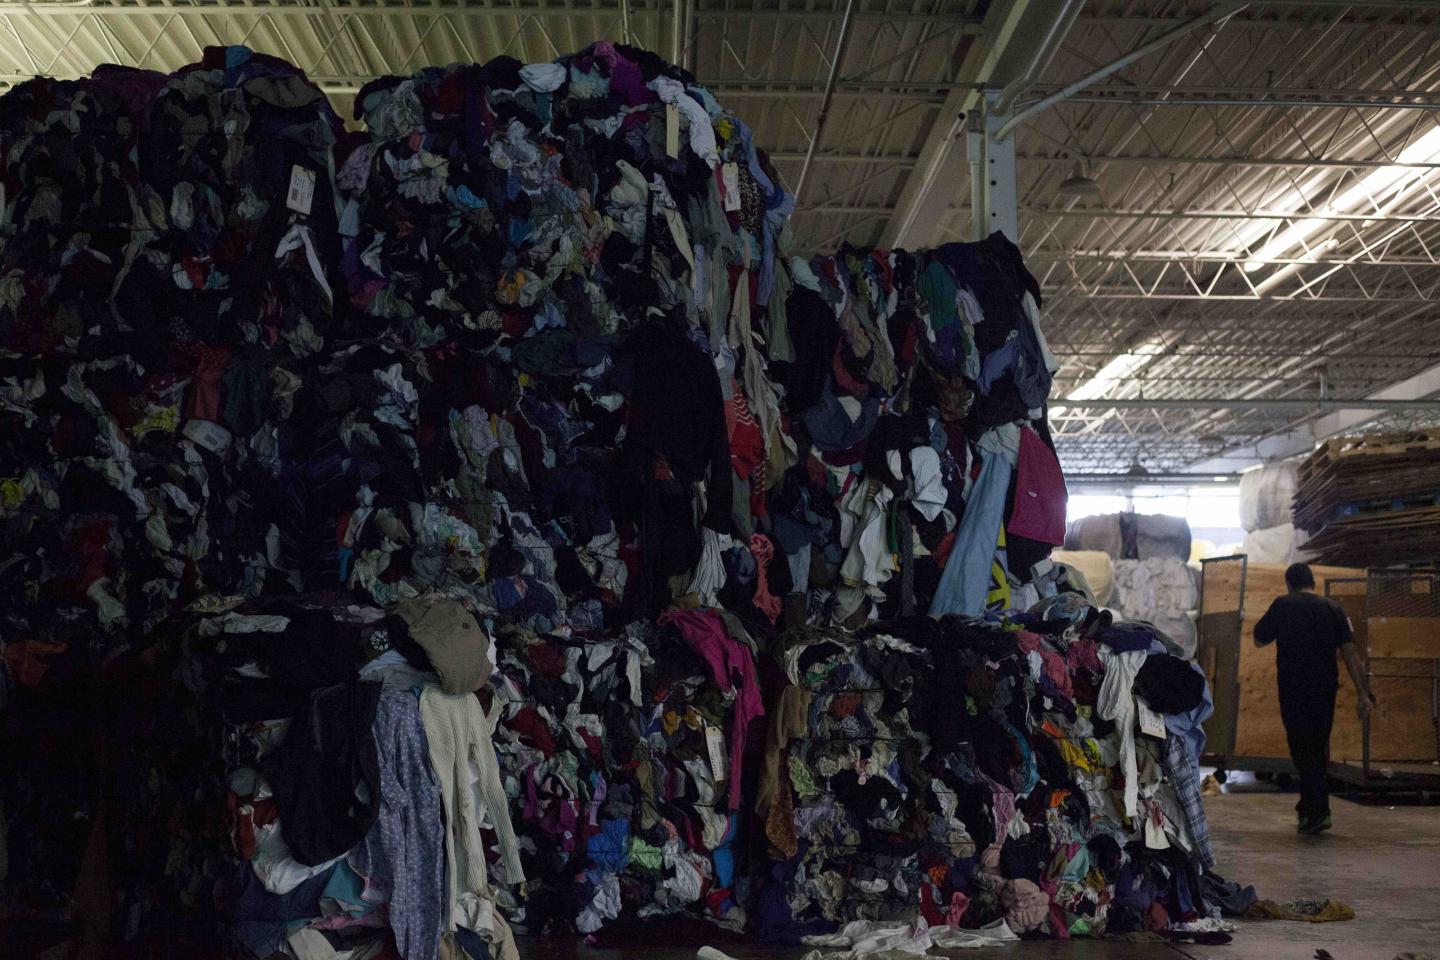 An enormous pile of discarded clothing.